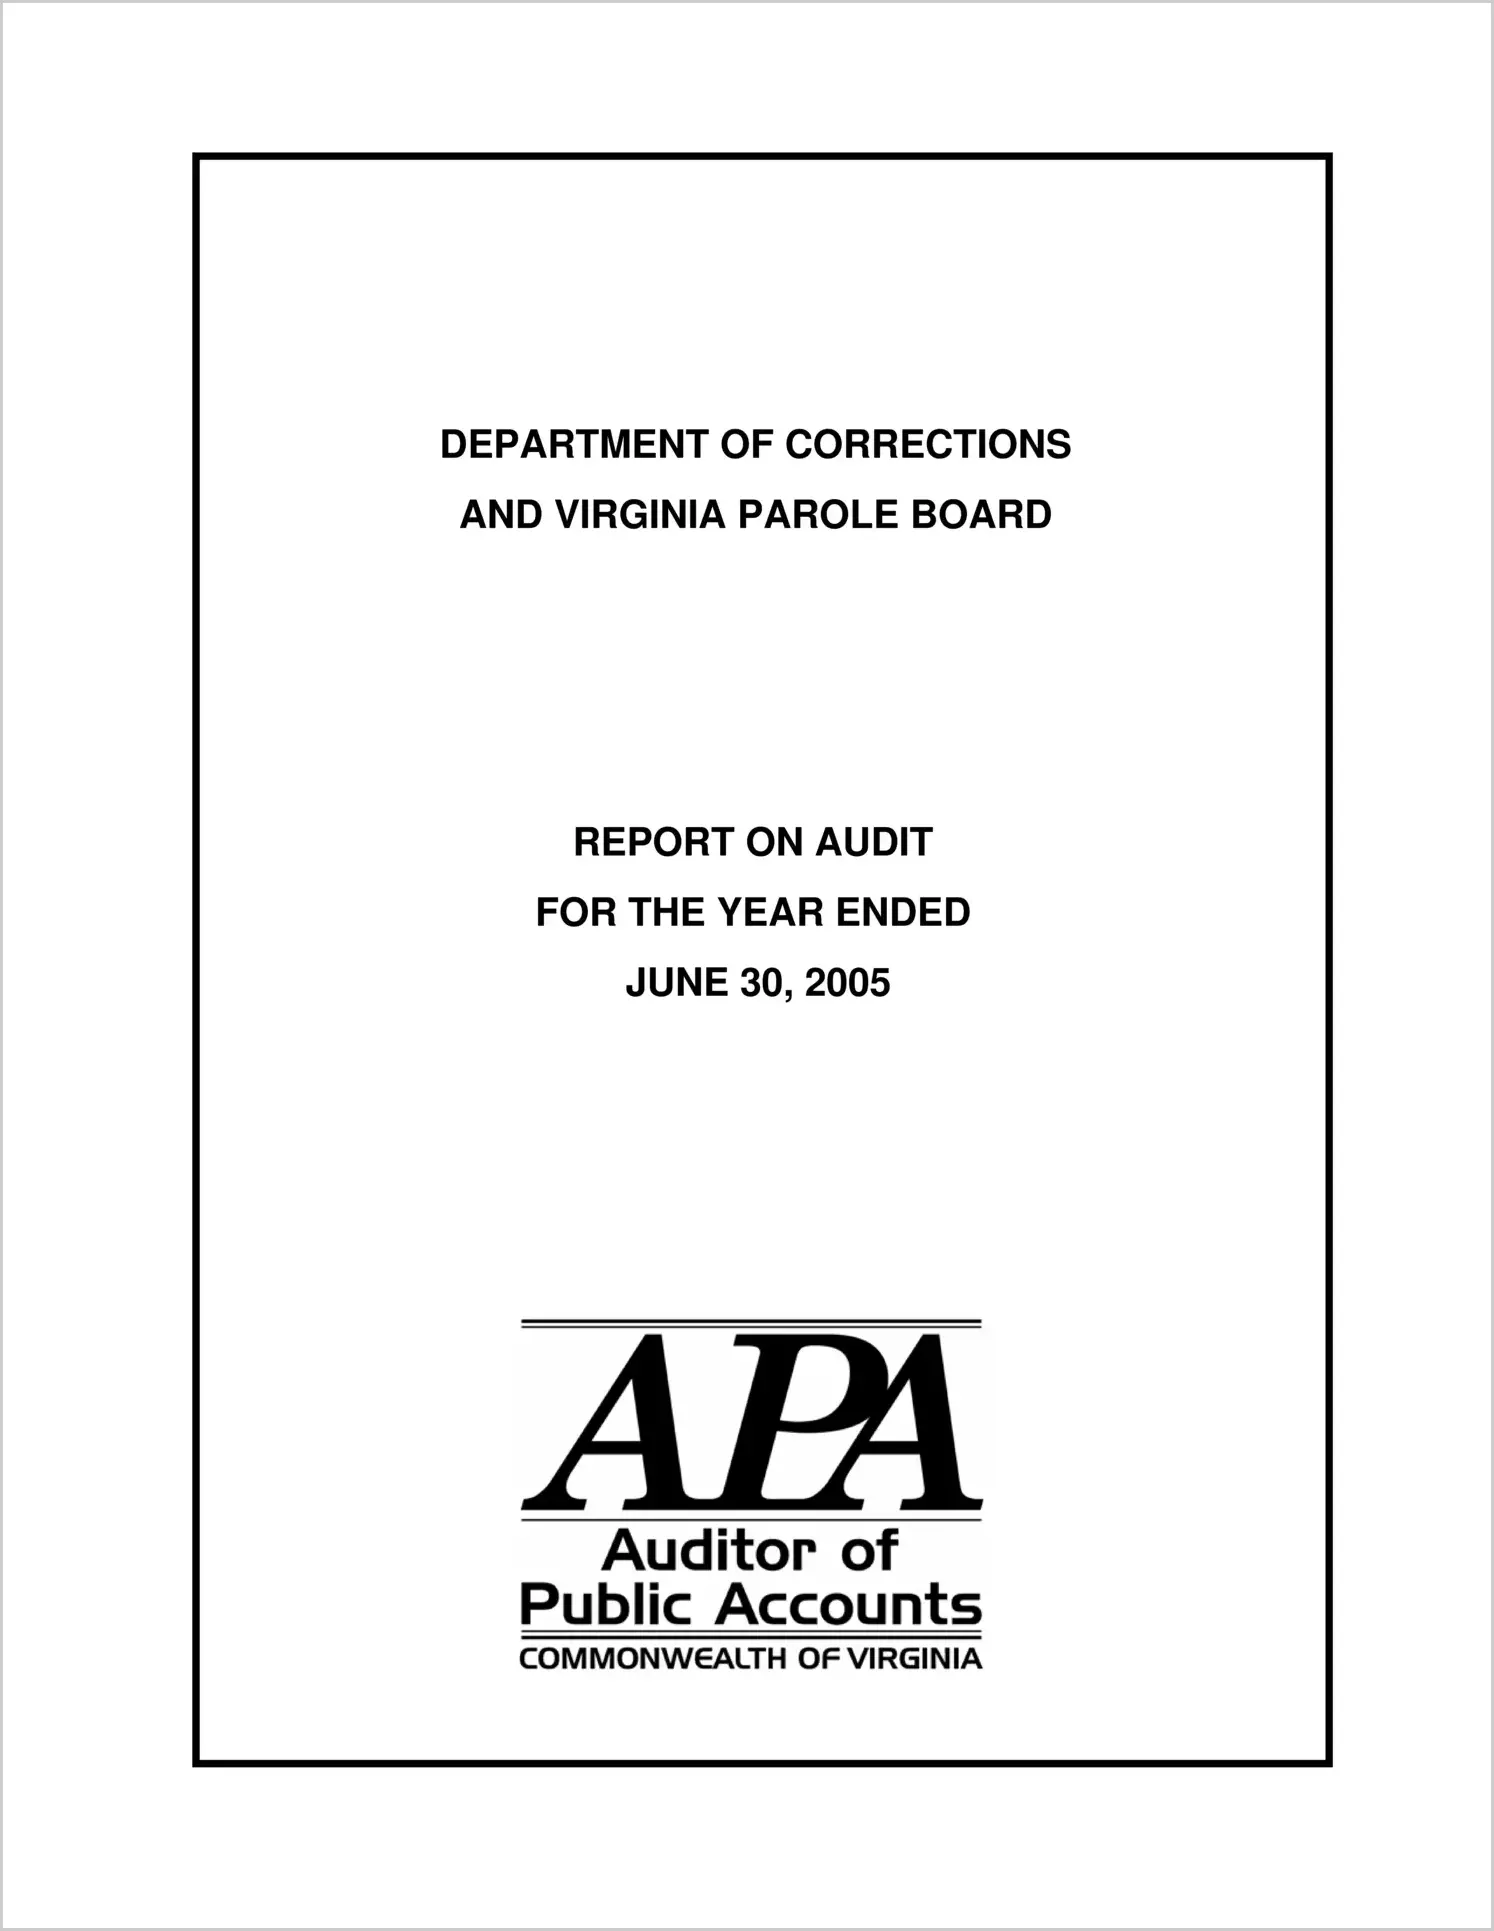 Department of Corrections and Virginia Parole Board for the year ended June 30, 2005